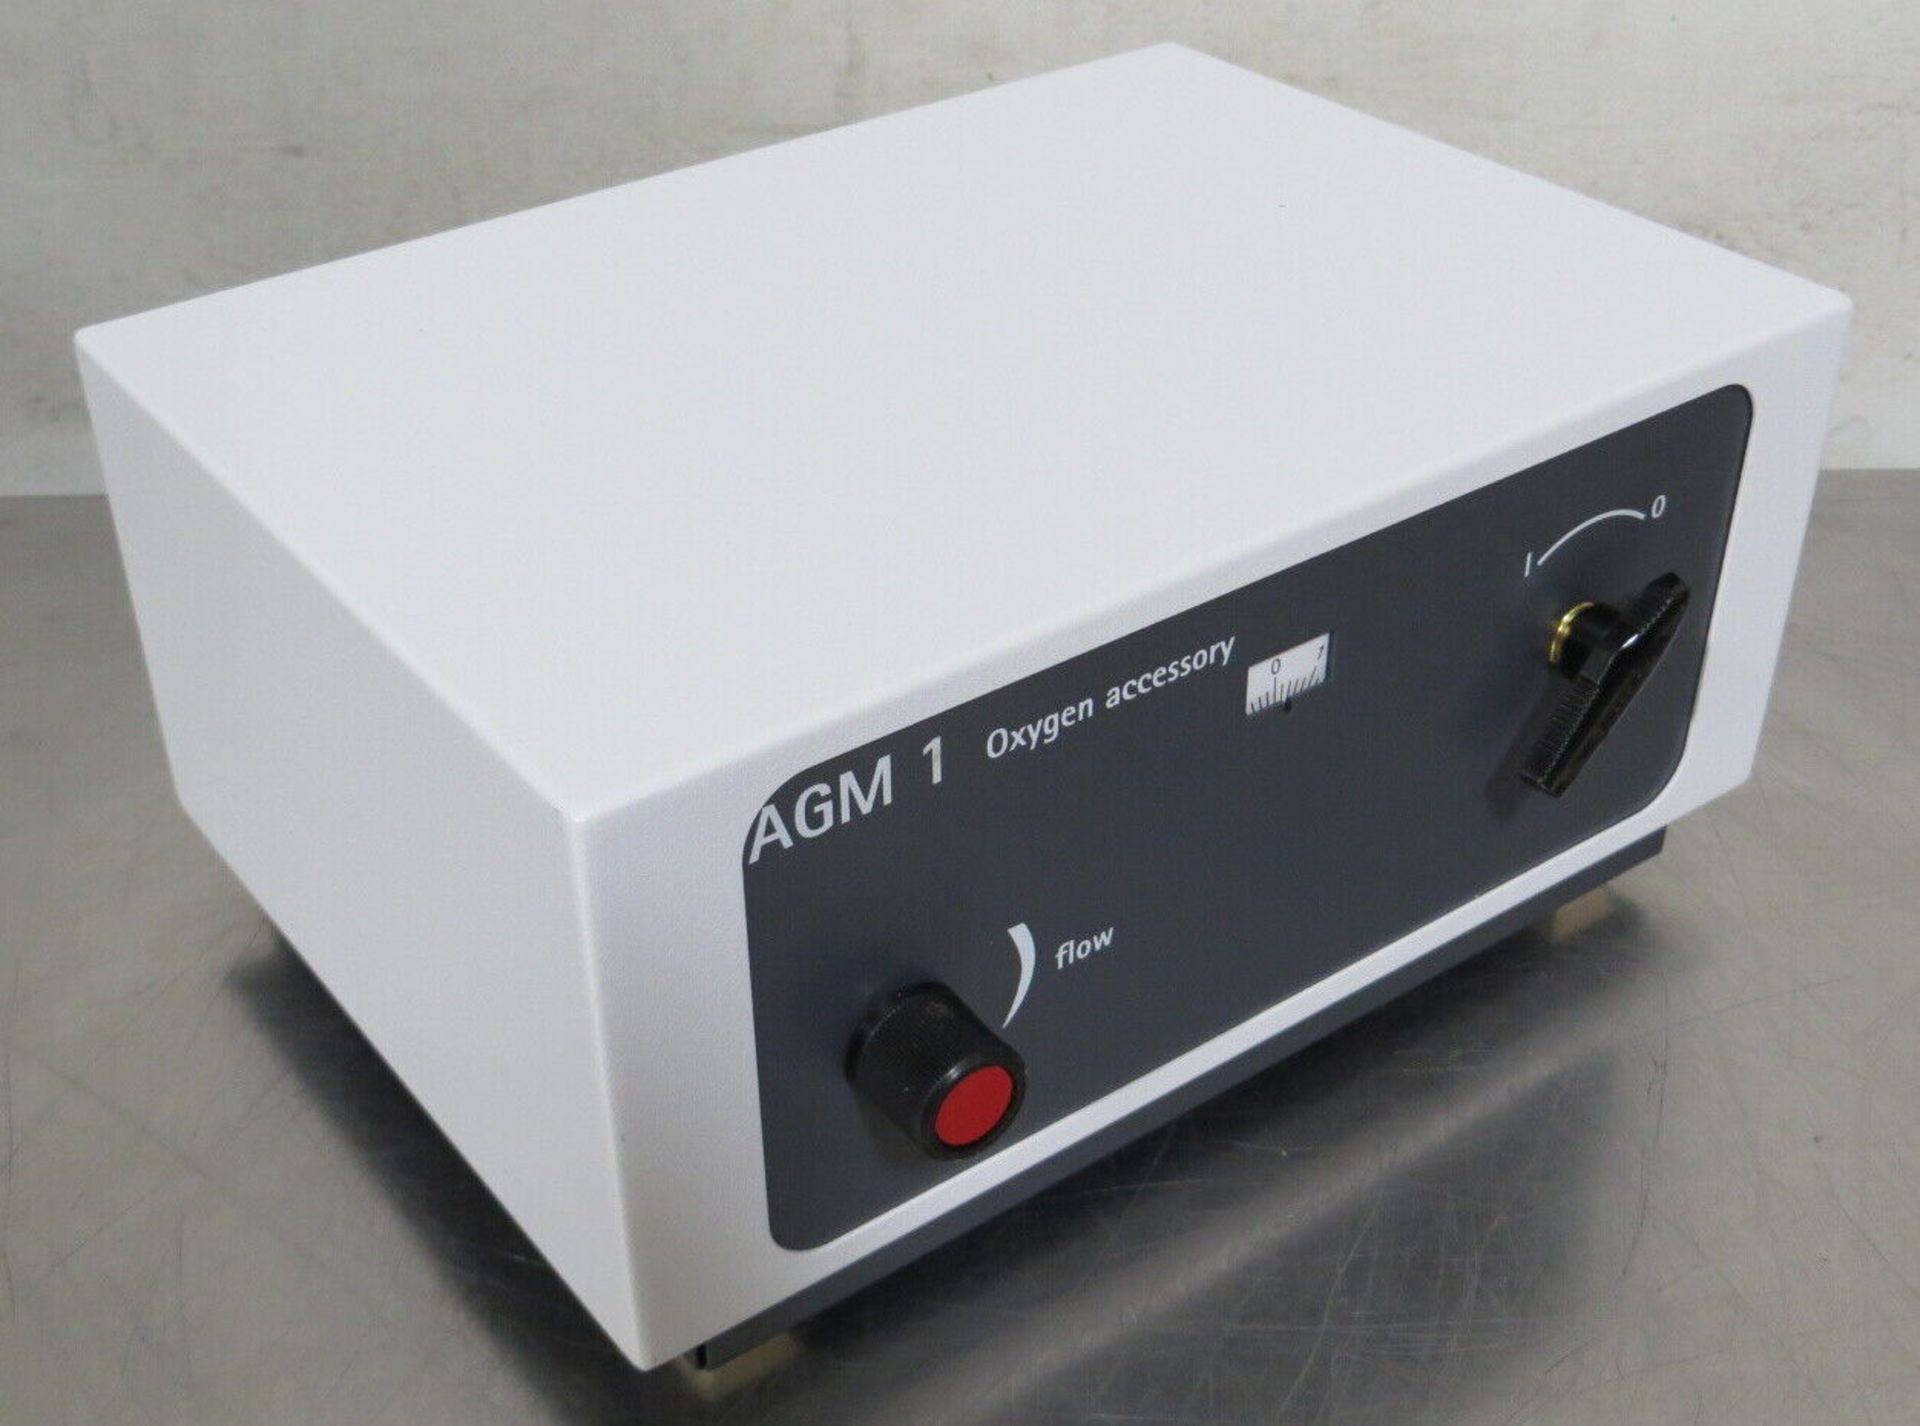 Agilent AGM1 Oxygen Gas Accessory for ICP-OES Spectrometer - Gilroy - Image 2 of 6